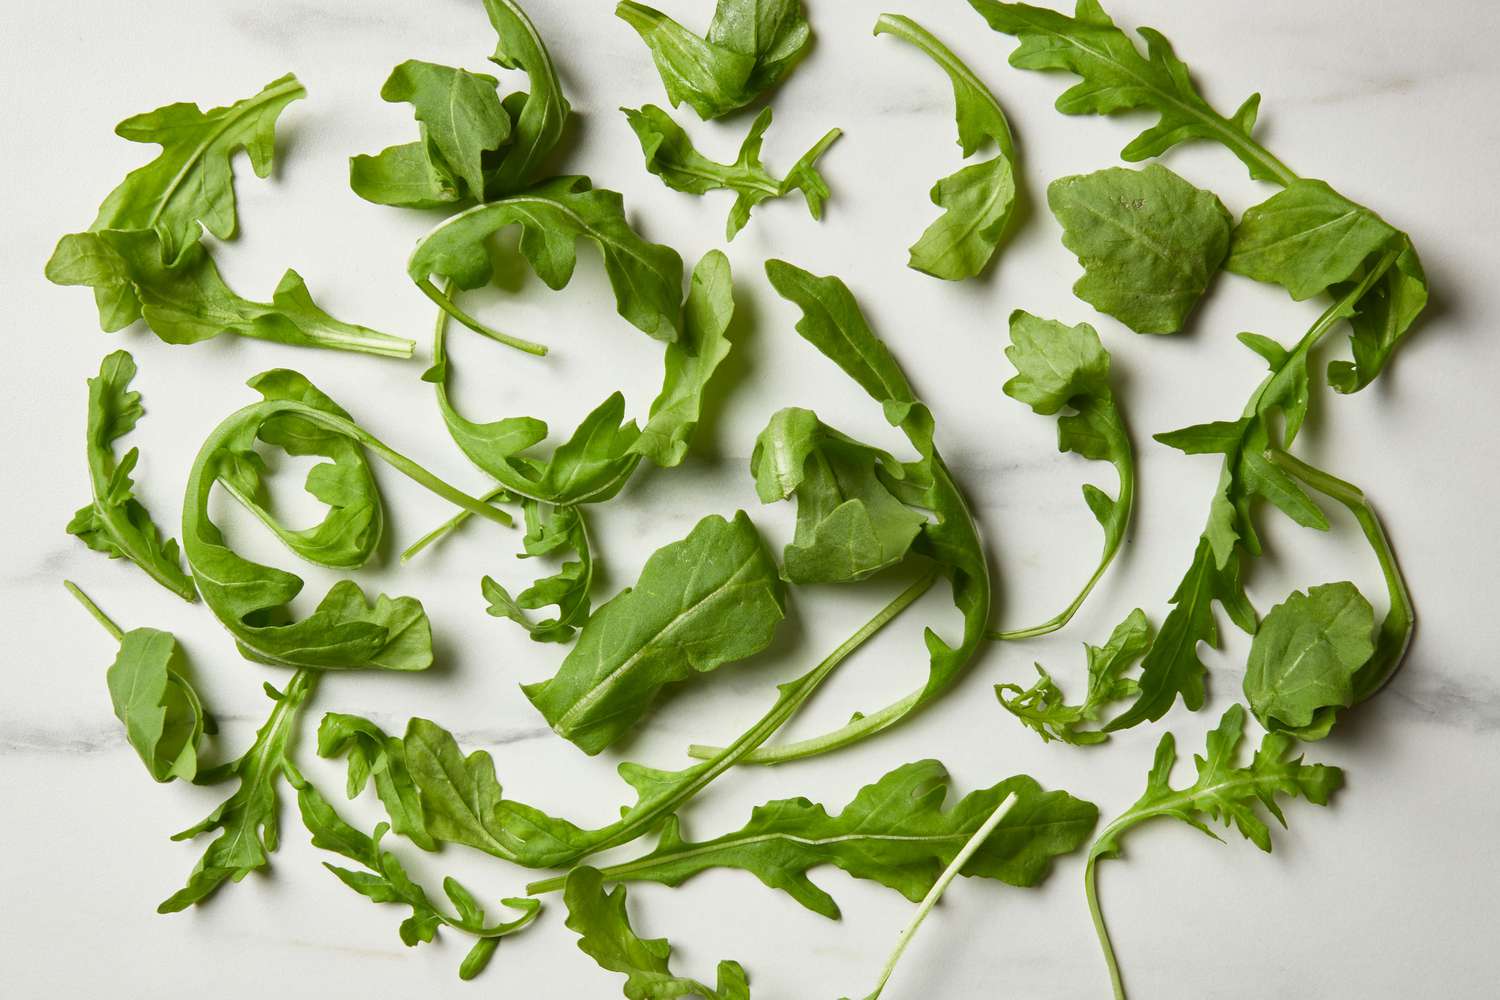 Leaves of arugula scattered on a marble surface